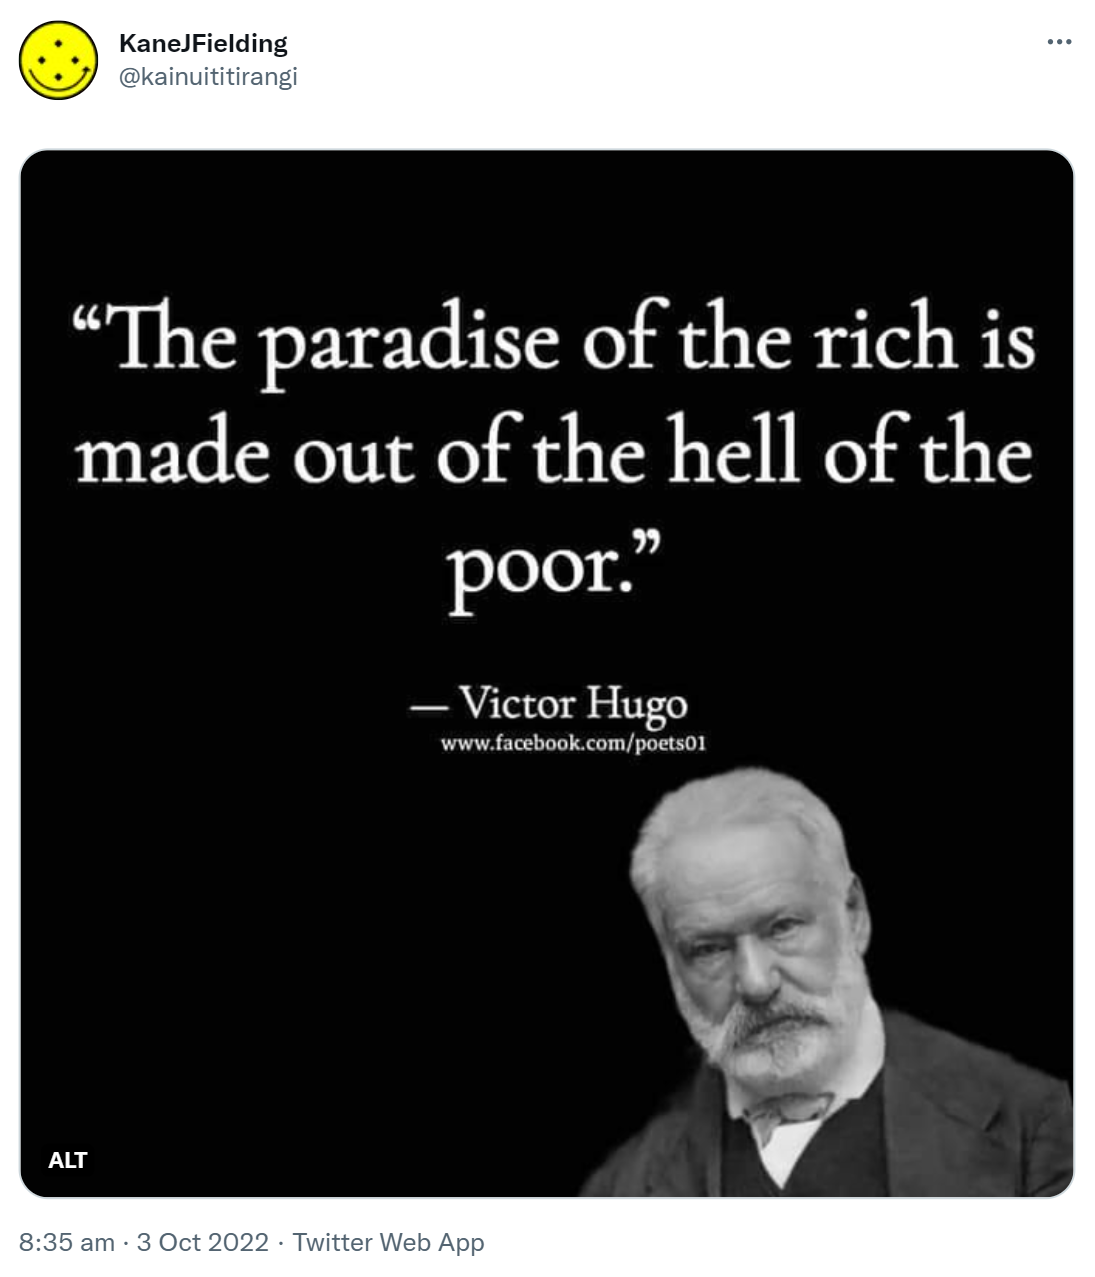 The paradise of the rich is made out of the hell of the poor. - Victor Hugo. 8:35 am · 3 Oct 2022.